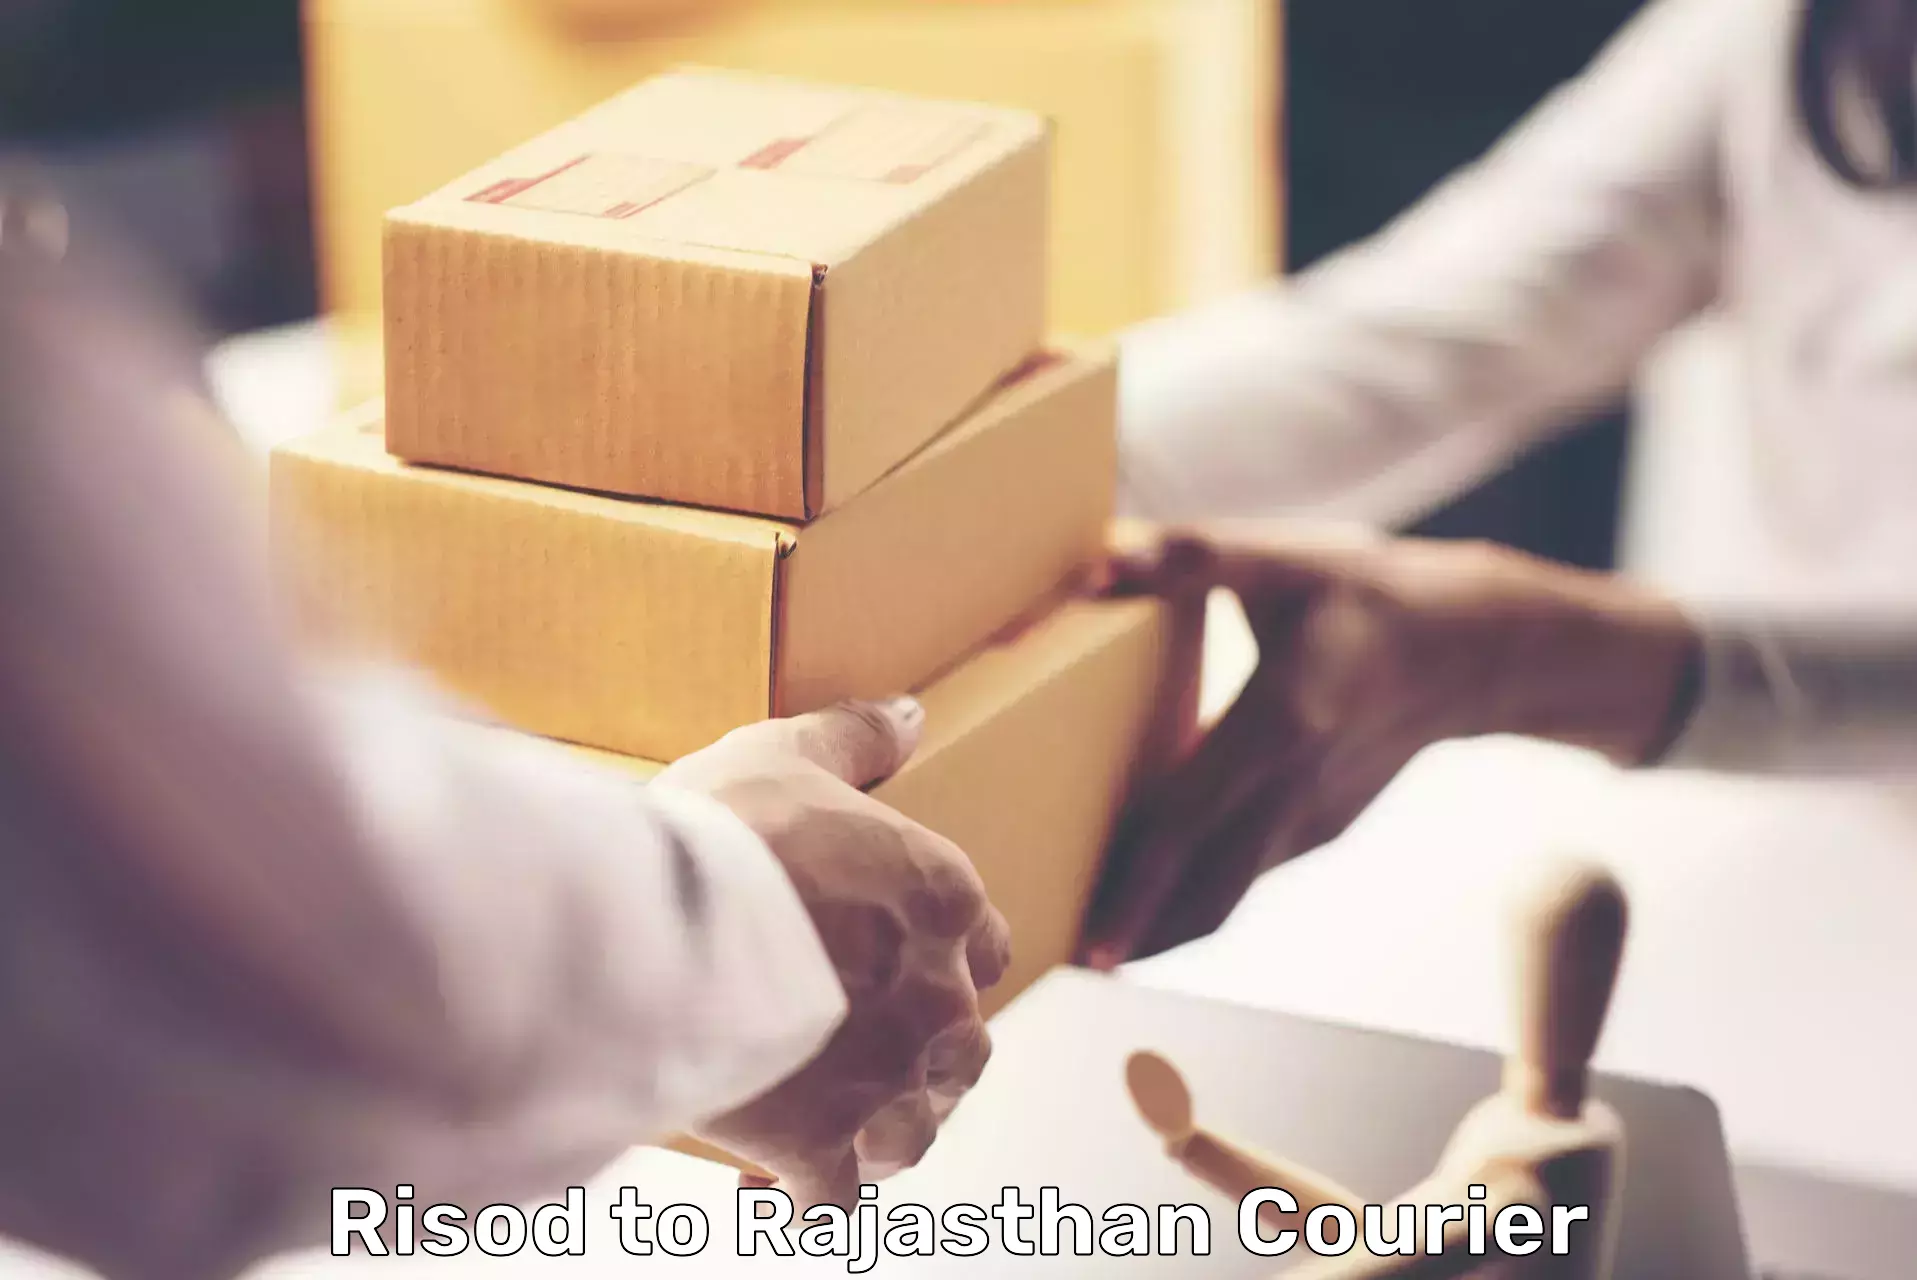 State-of-the-art courier technology Risod to Rajasthan